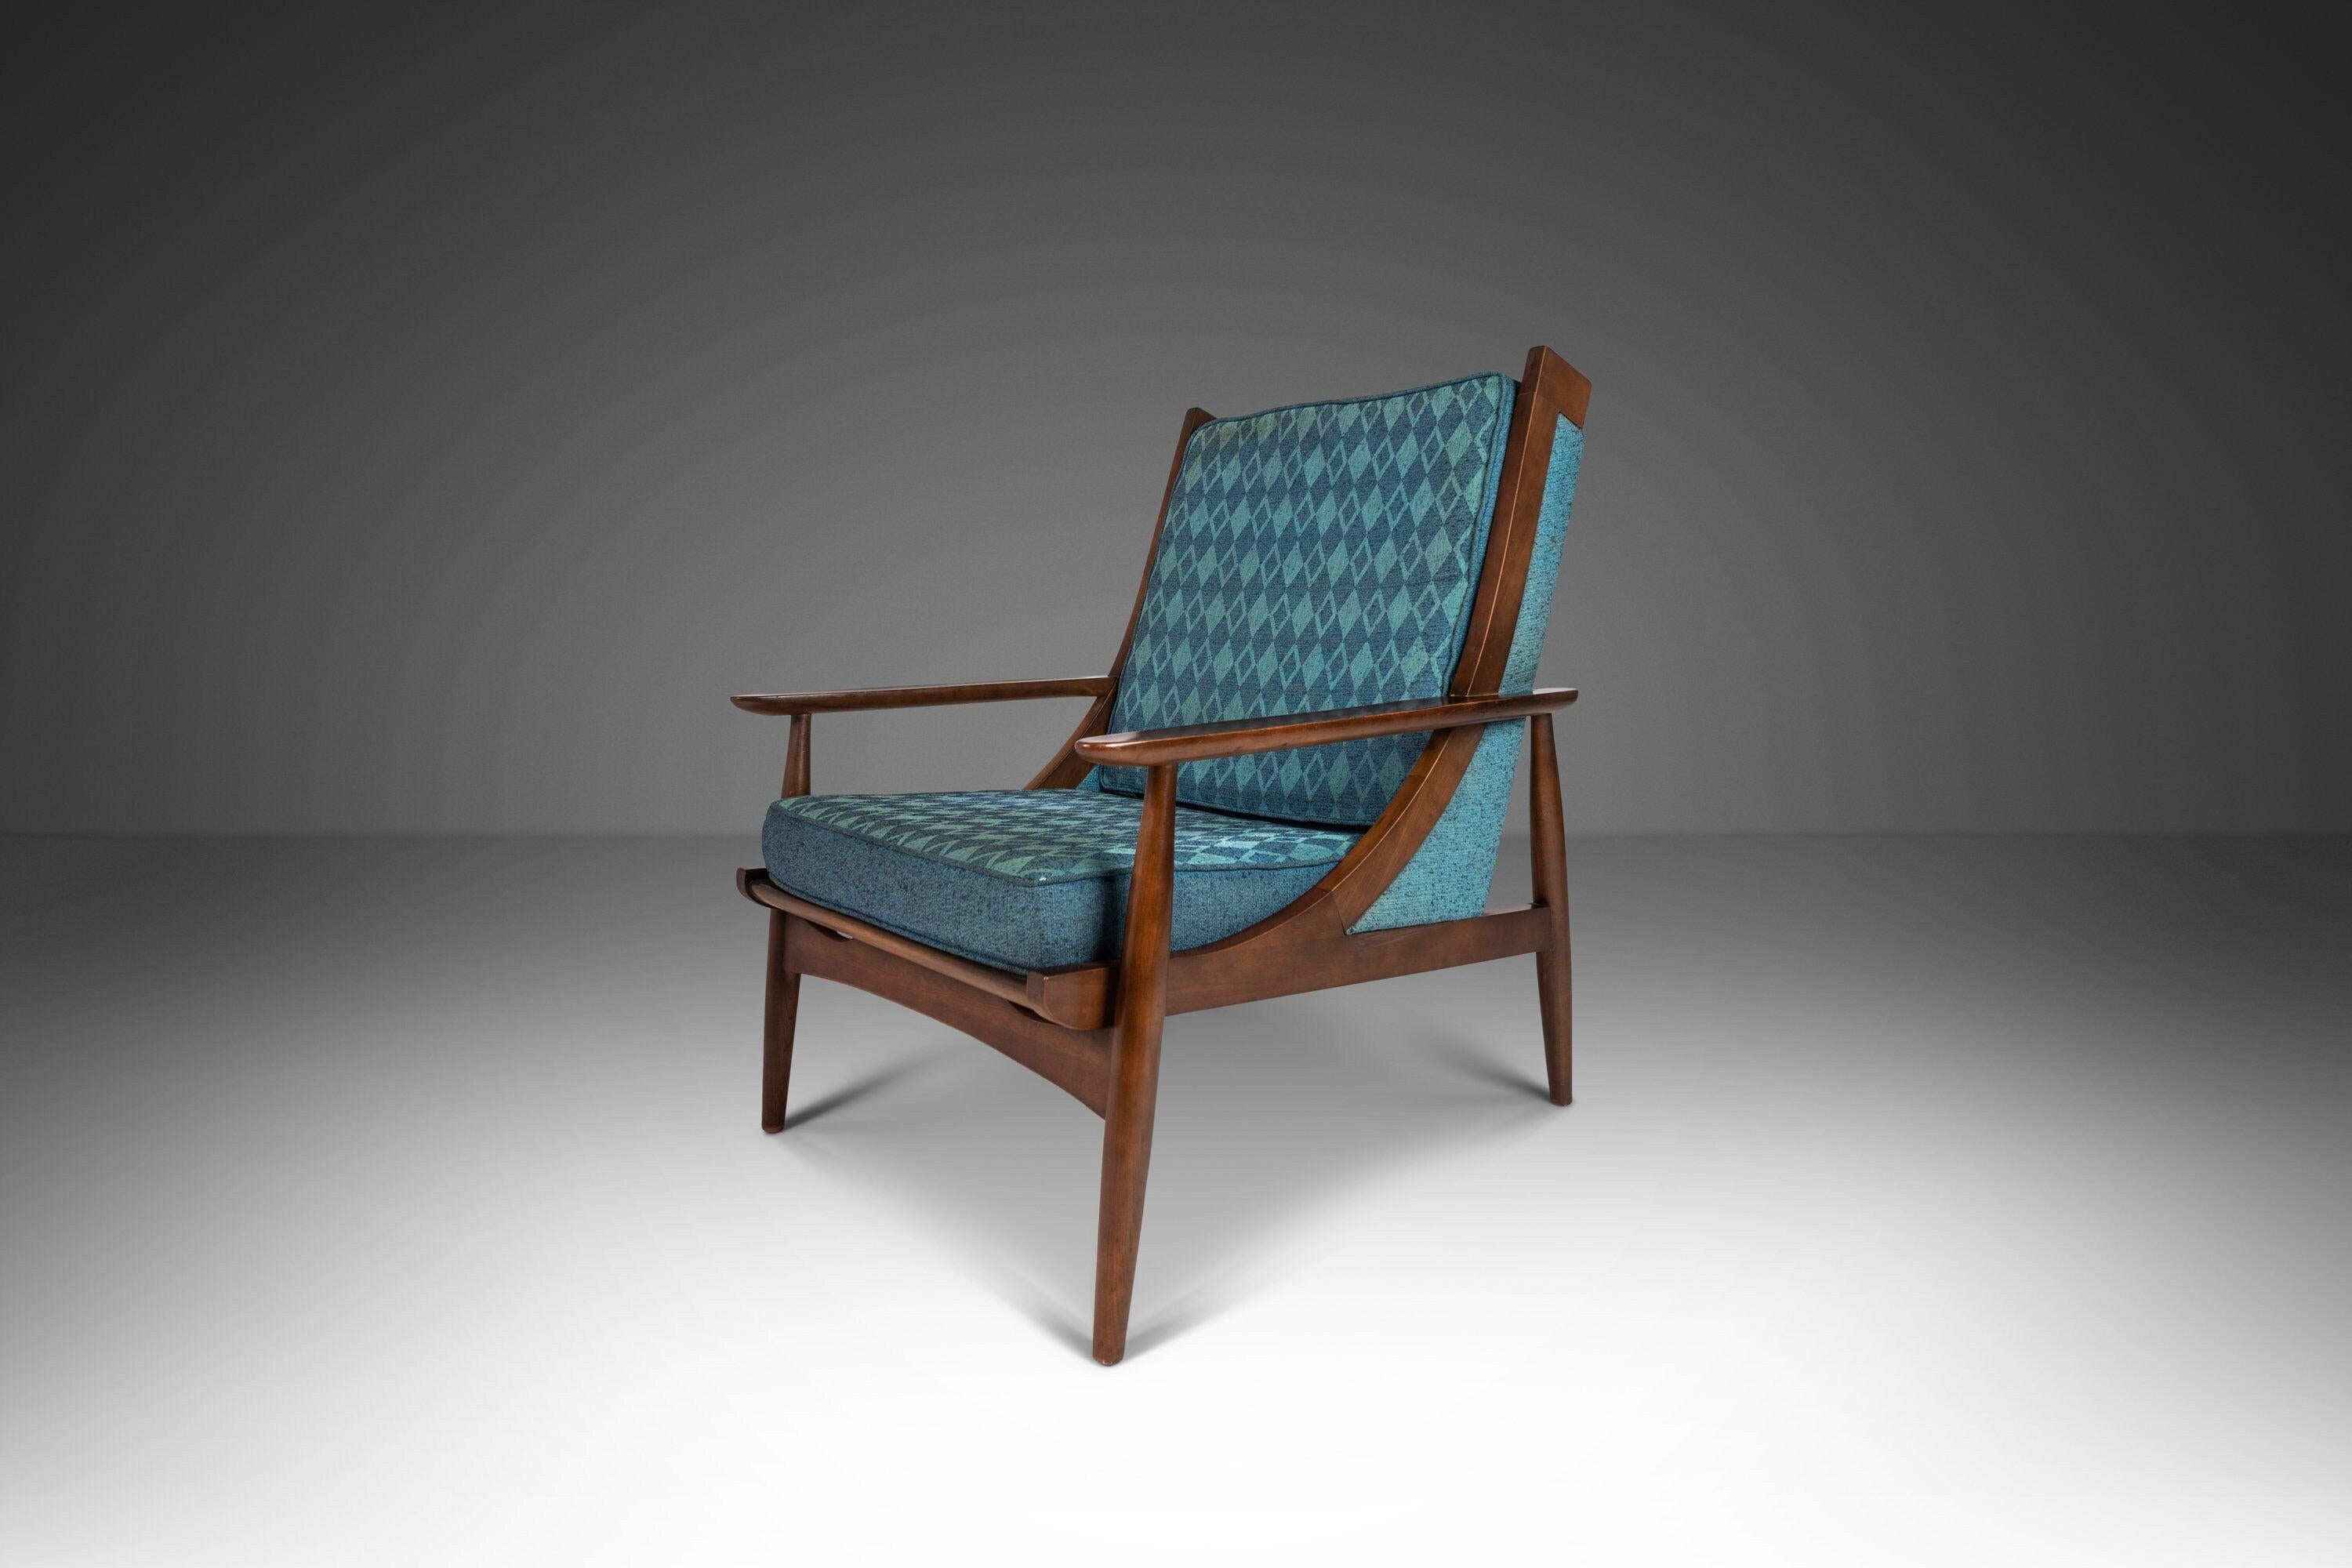 As stylish as it is comfortable this splendidly retro lounge chair is unlike any we've ever come across. Constructed of solid walnut and featuring graceful curves, inset-sculpted arms and intricate vertical backrest dowels this lounger truly